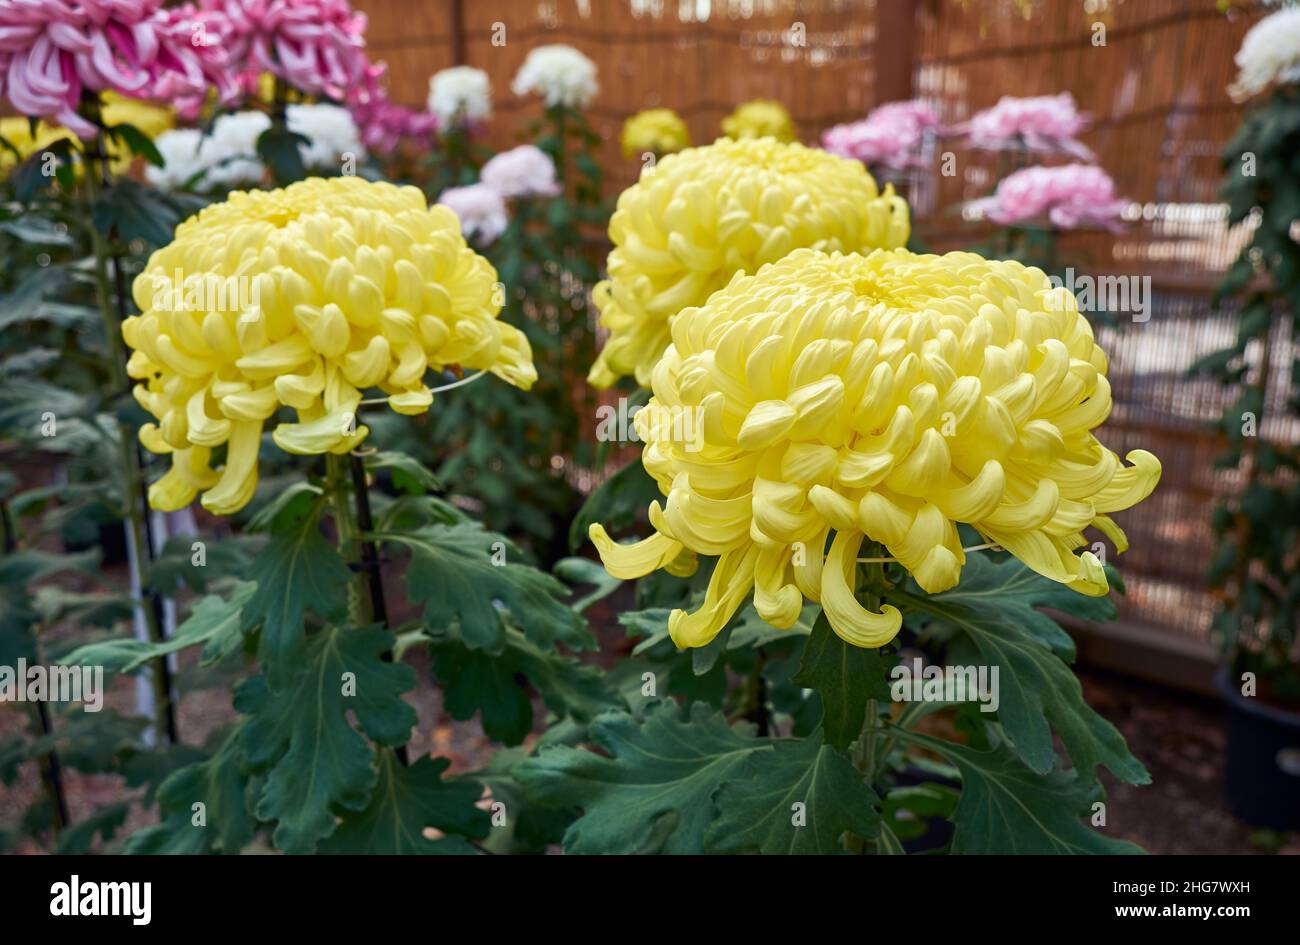 The exhibition of giant chrysanthemum flower, the notable image of Japanese culture at Yasukuni Shrine (Kikka-ten). The series of flower displays arra Stock Photo